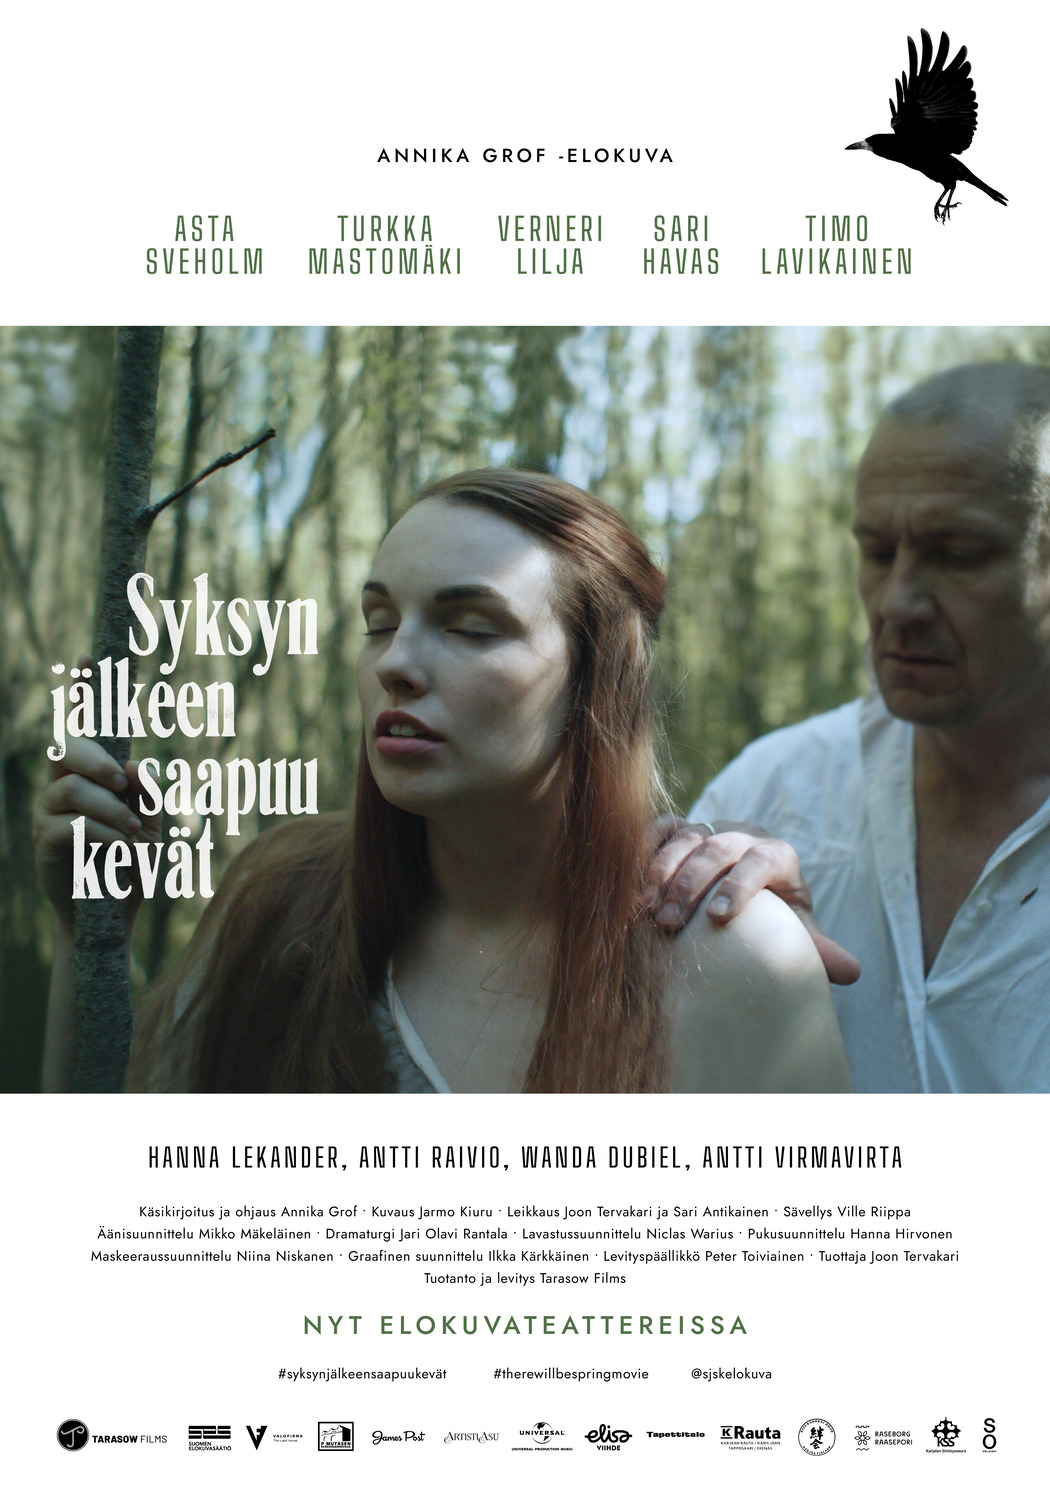 Extra Large Movie Poster Image for Syksyn jälkeen saapuu kevät 